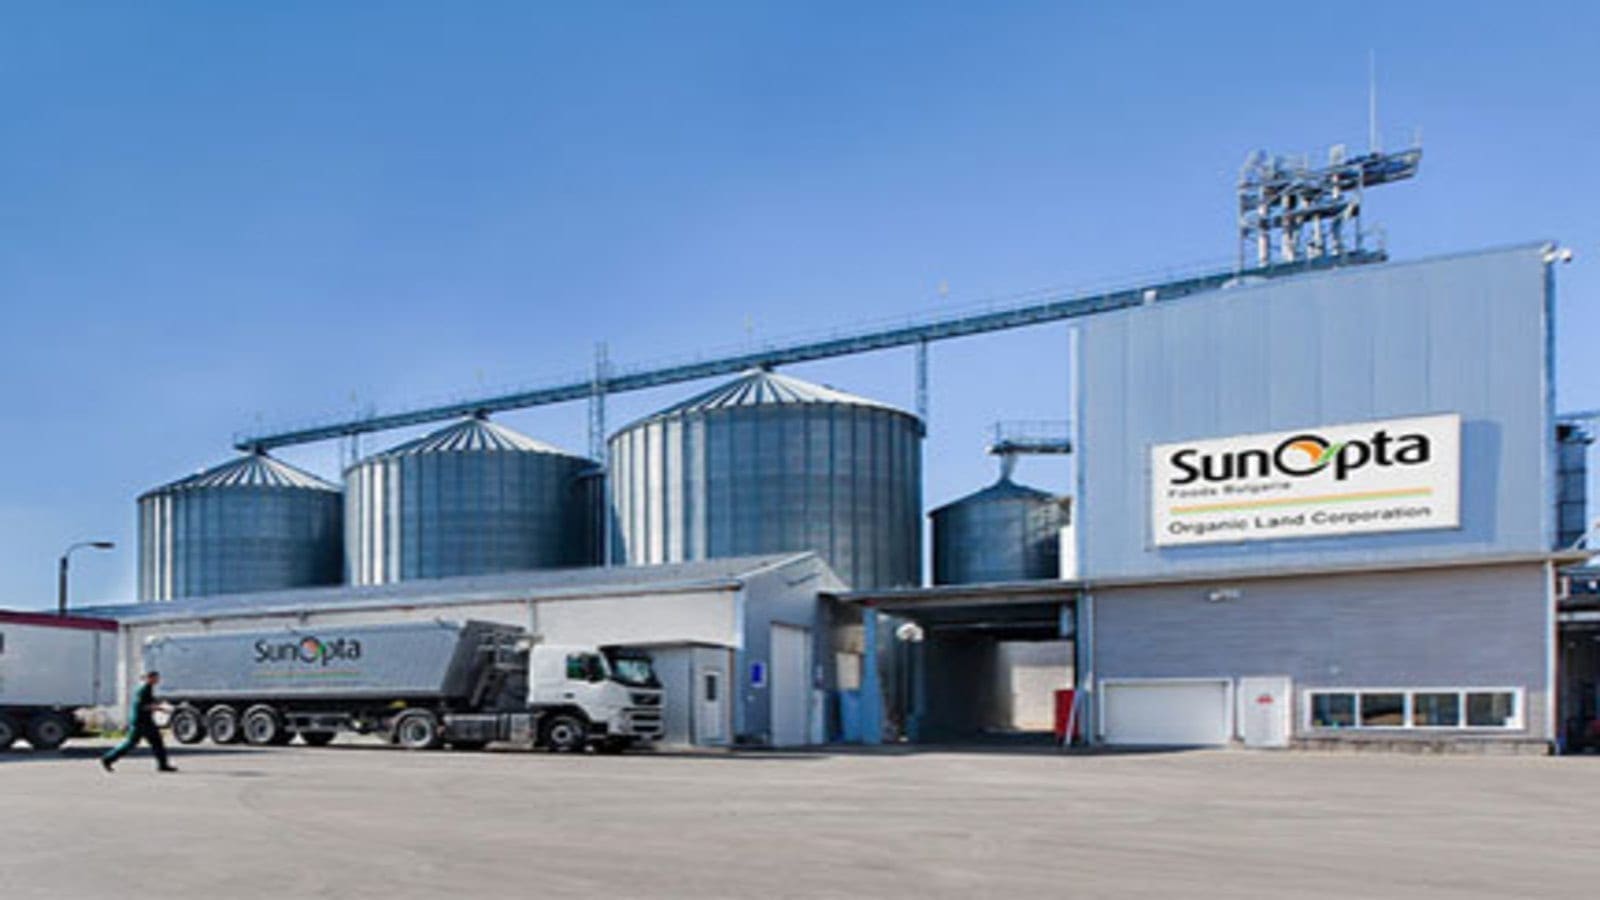 Acomo to acquire SunOpta’s global ingredients business for US$390m